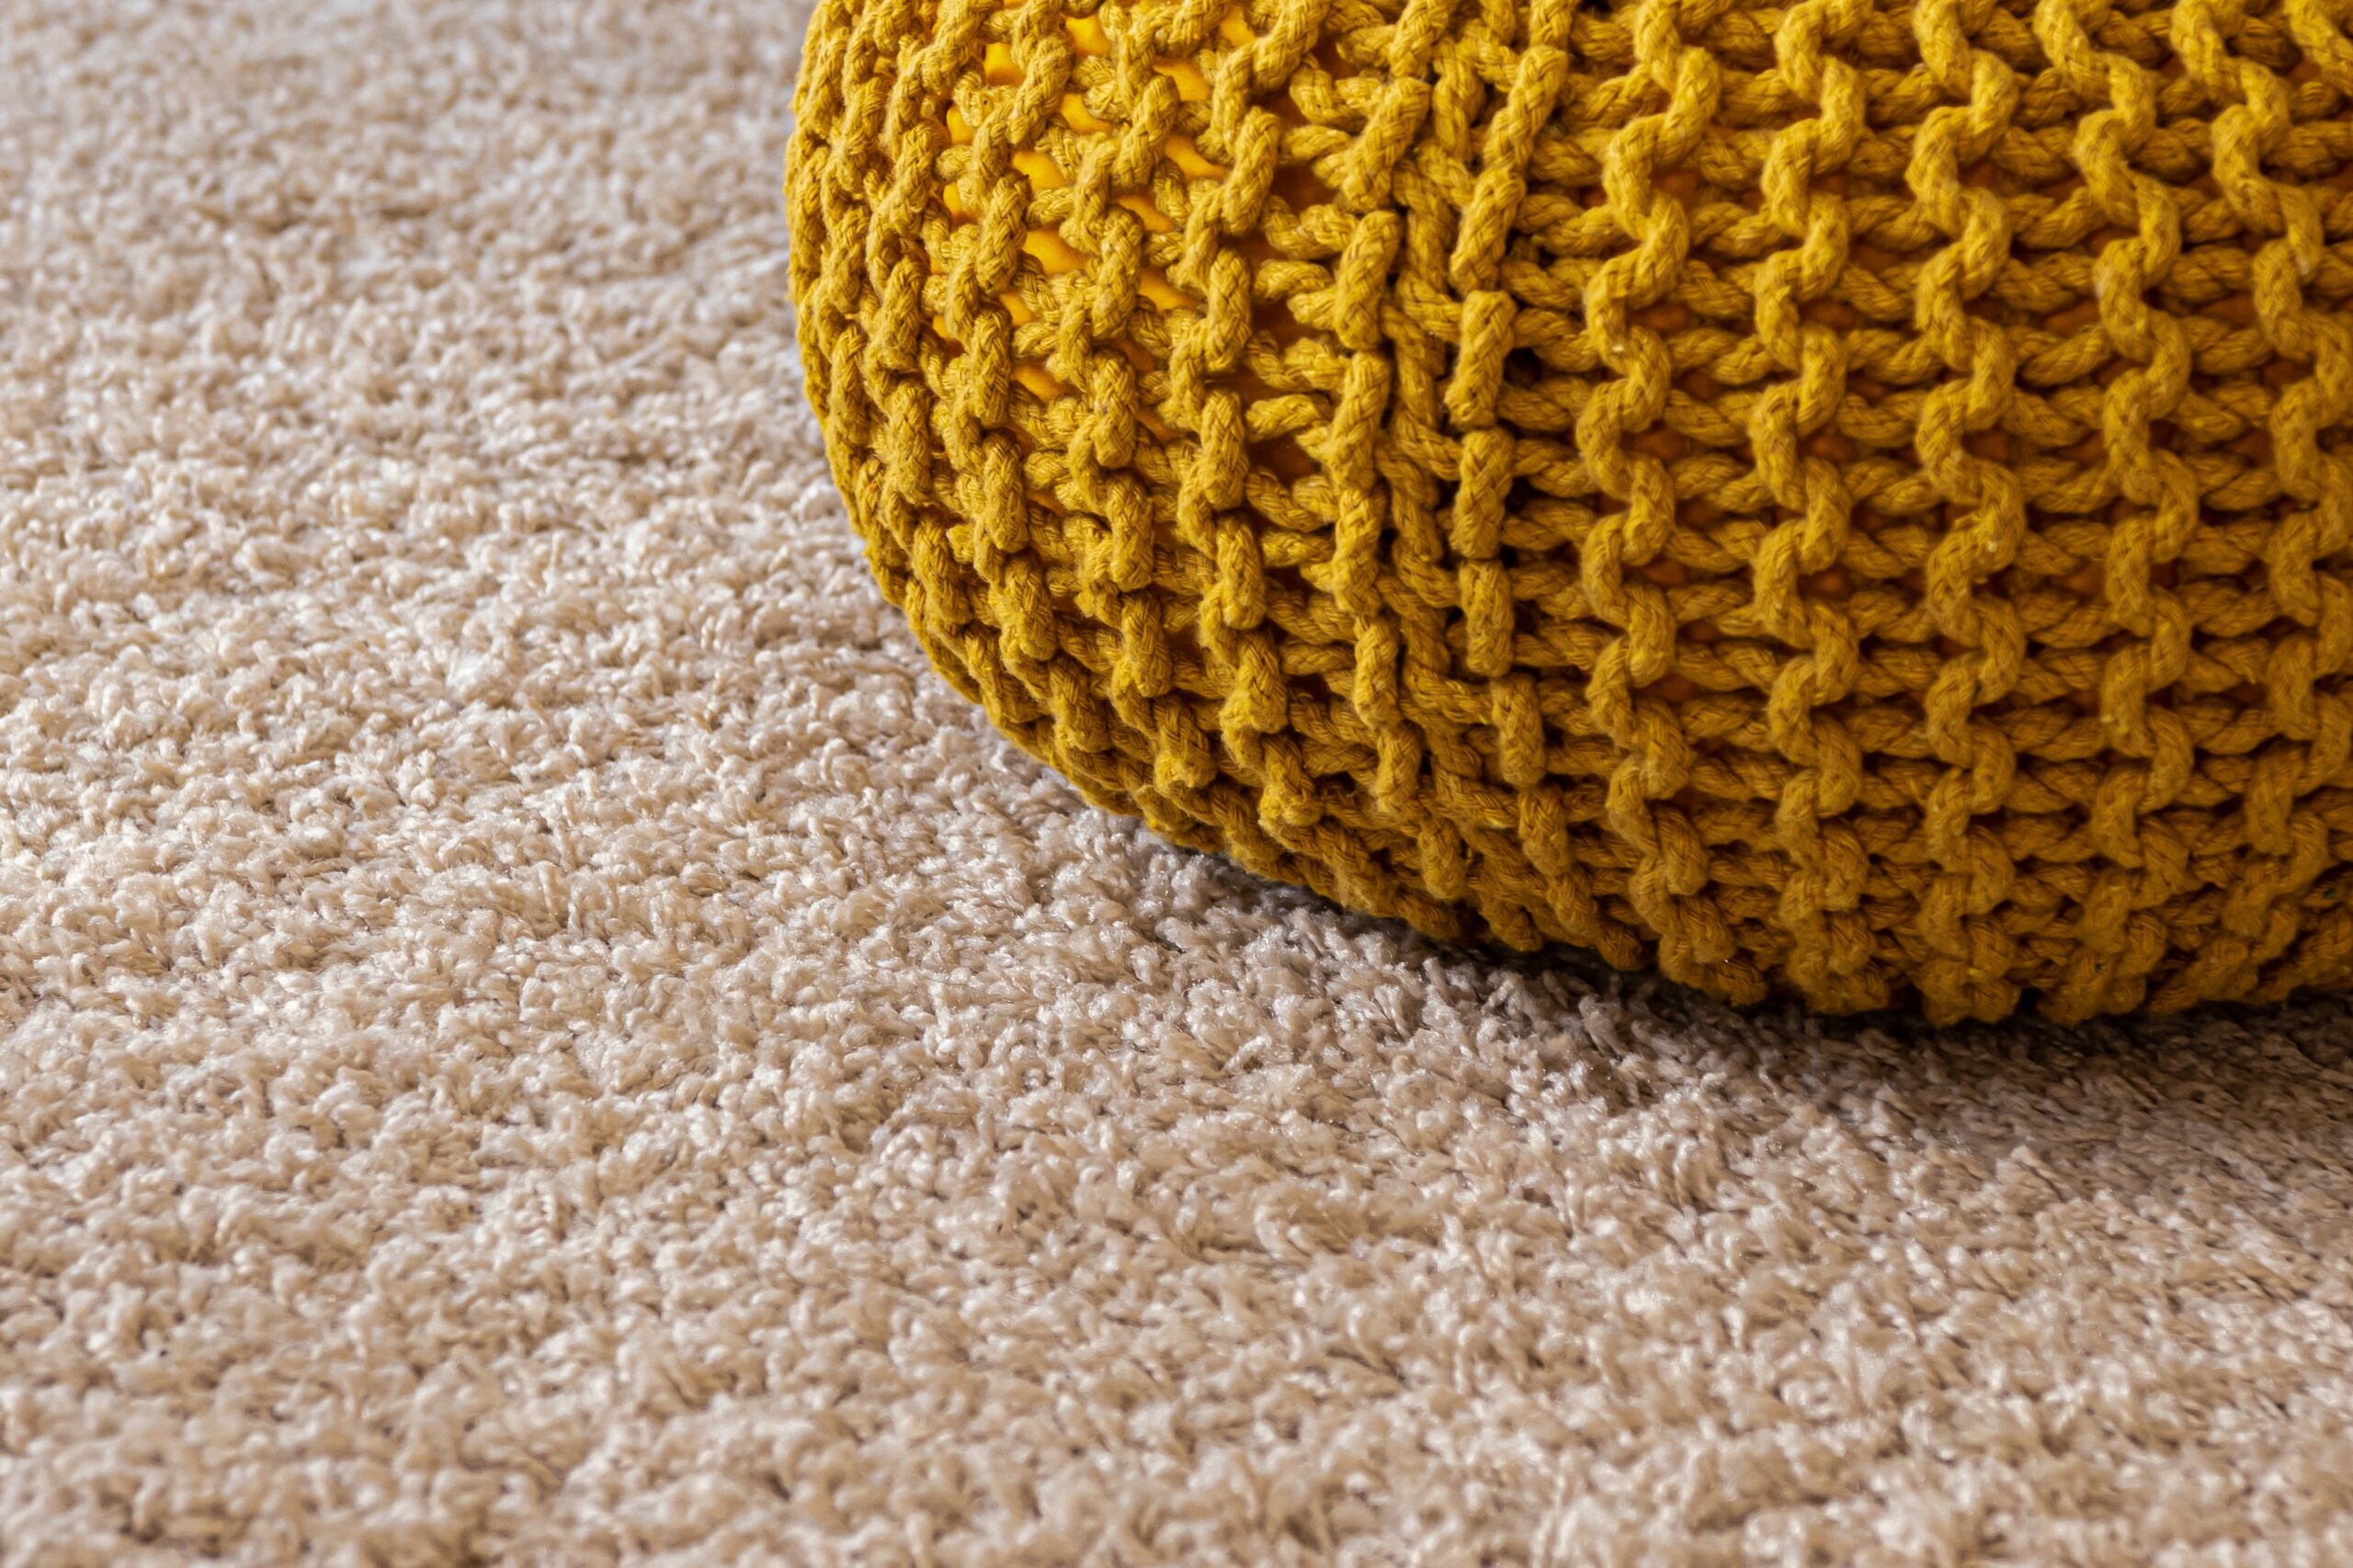 carpet cleaning tips and tricks